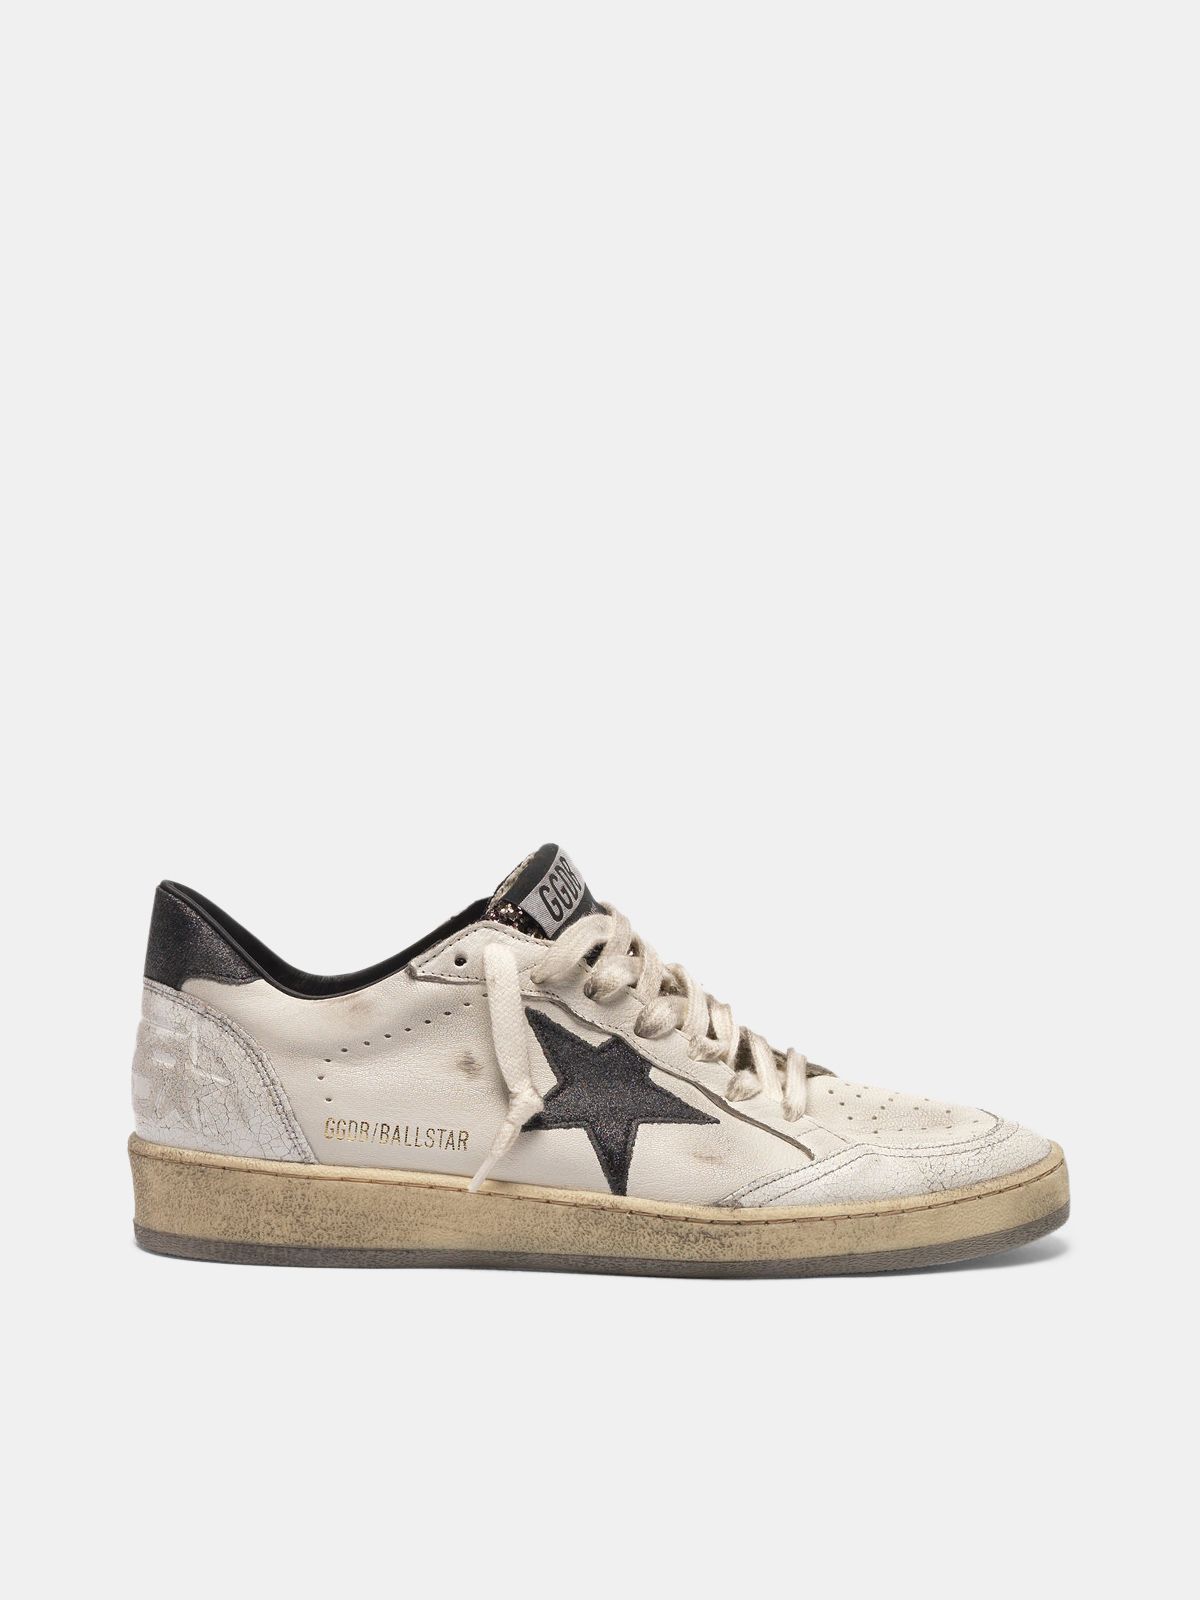 Ball Star sneakers with glitter tongue | Golden Goose